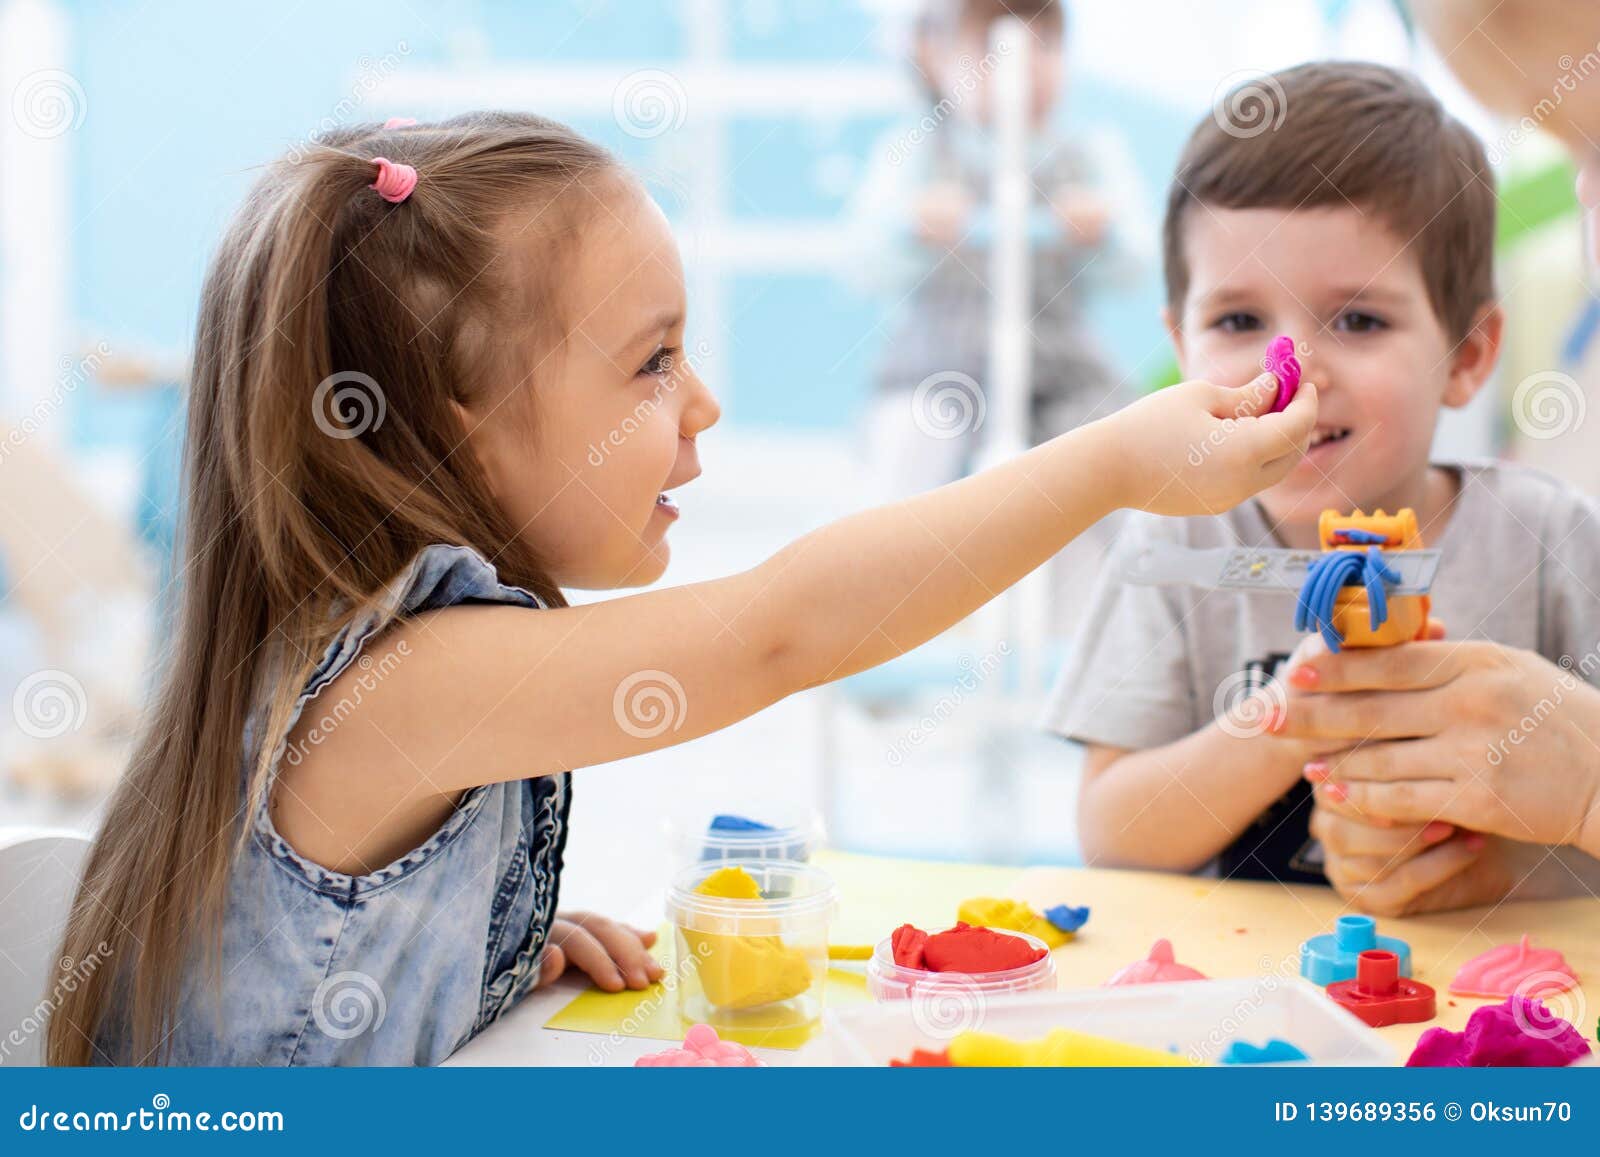 children girl and boy play in kids daycare center